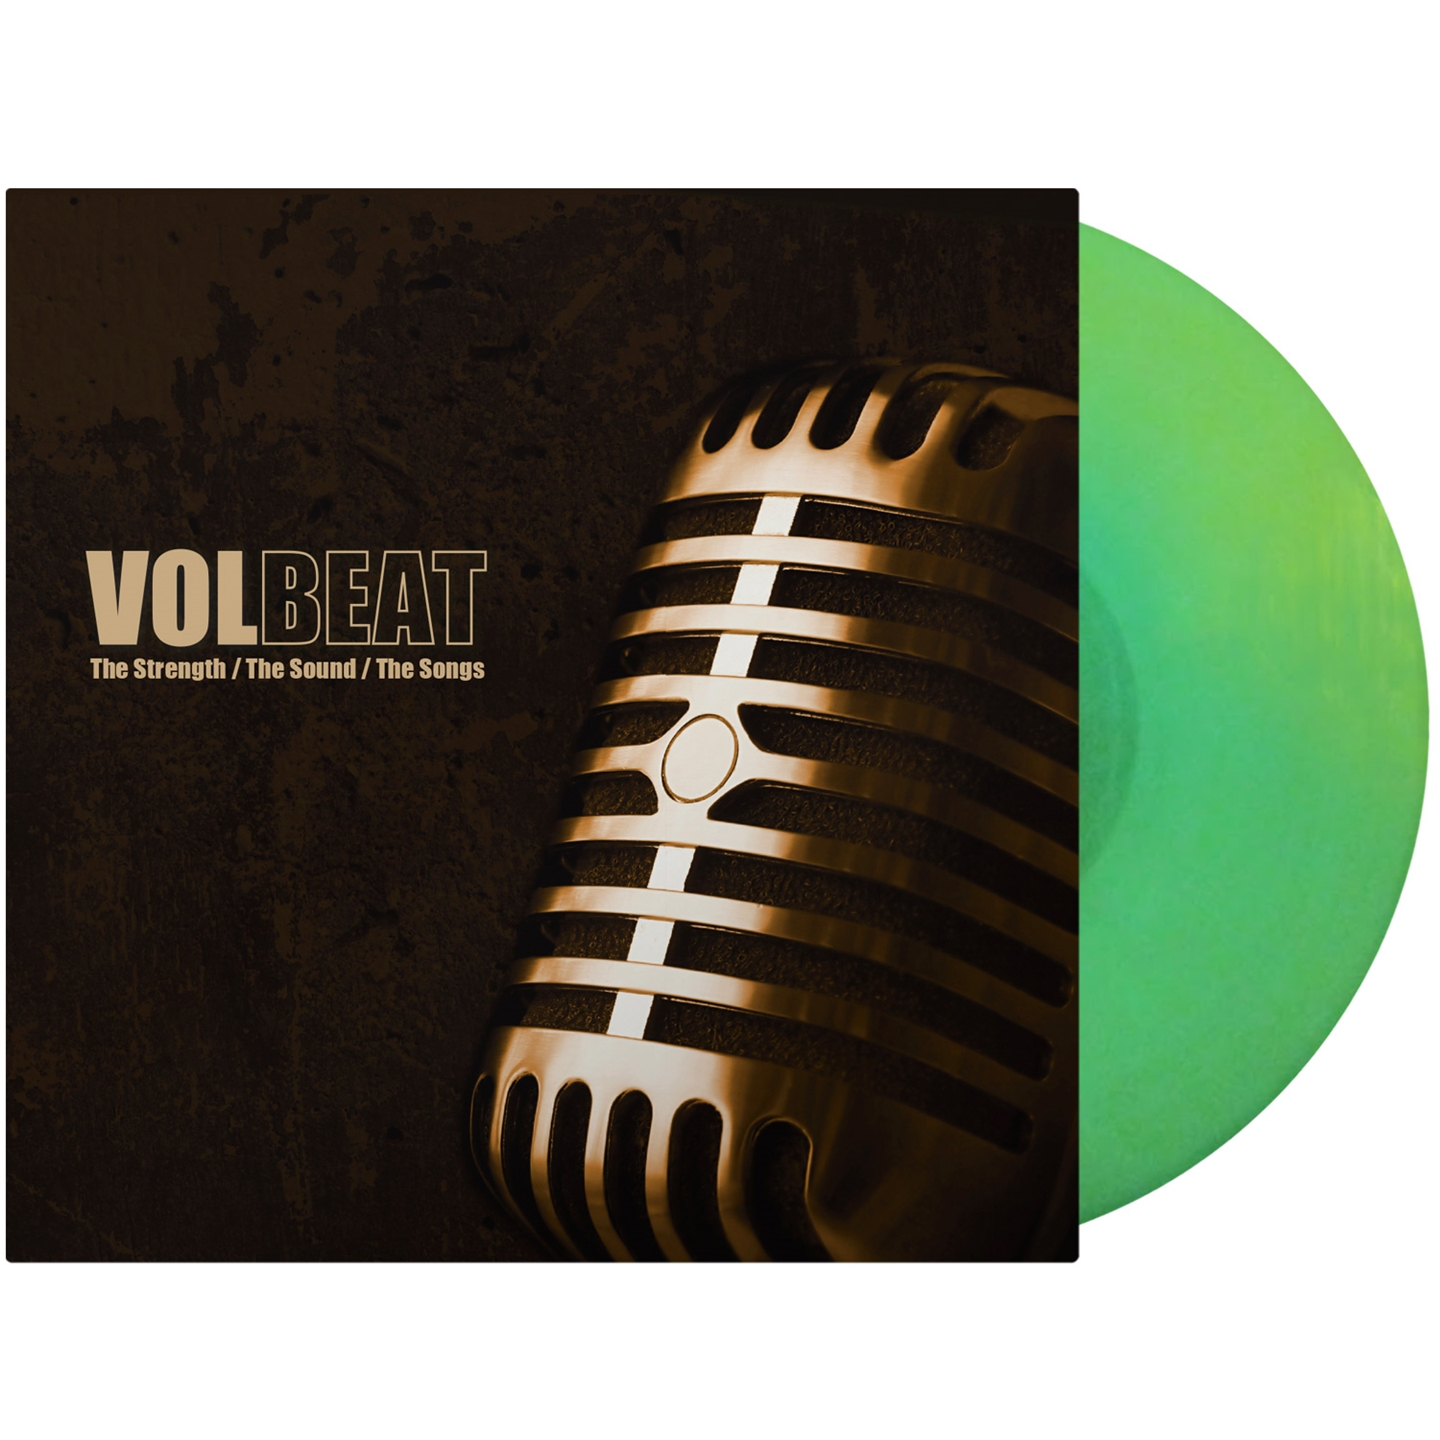 THE STRENGTH / THE SOUND / THE SONGS [GLOW IN THE DARK VINYL]